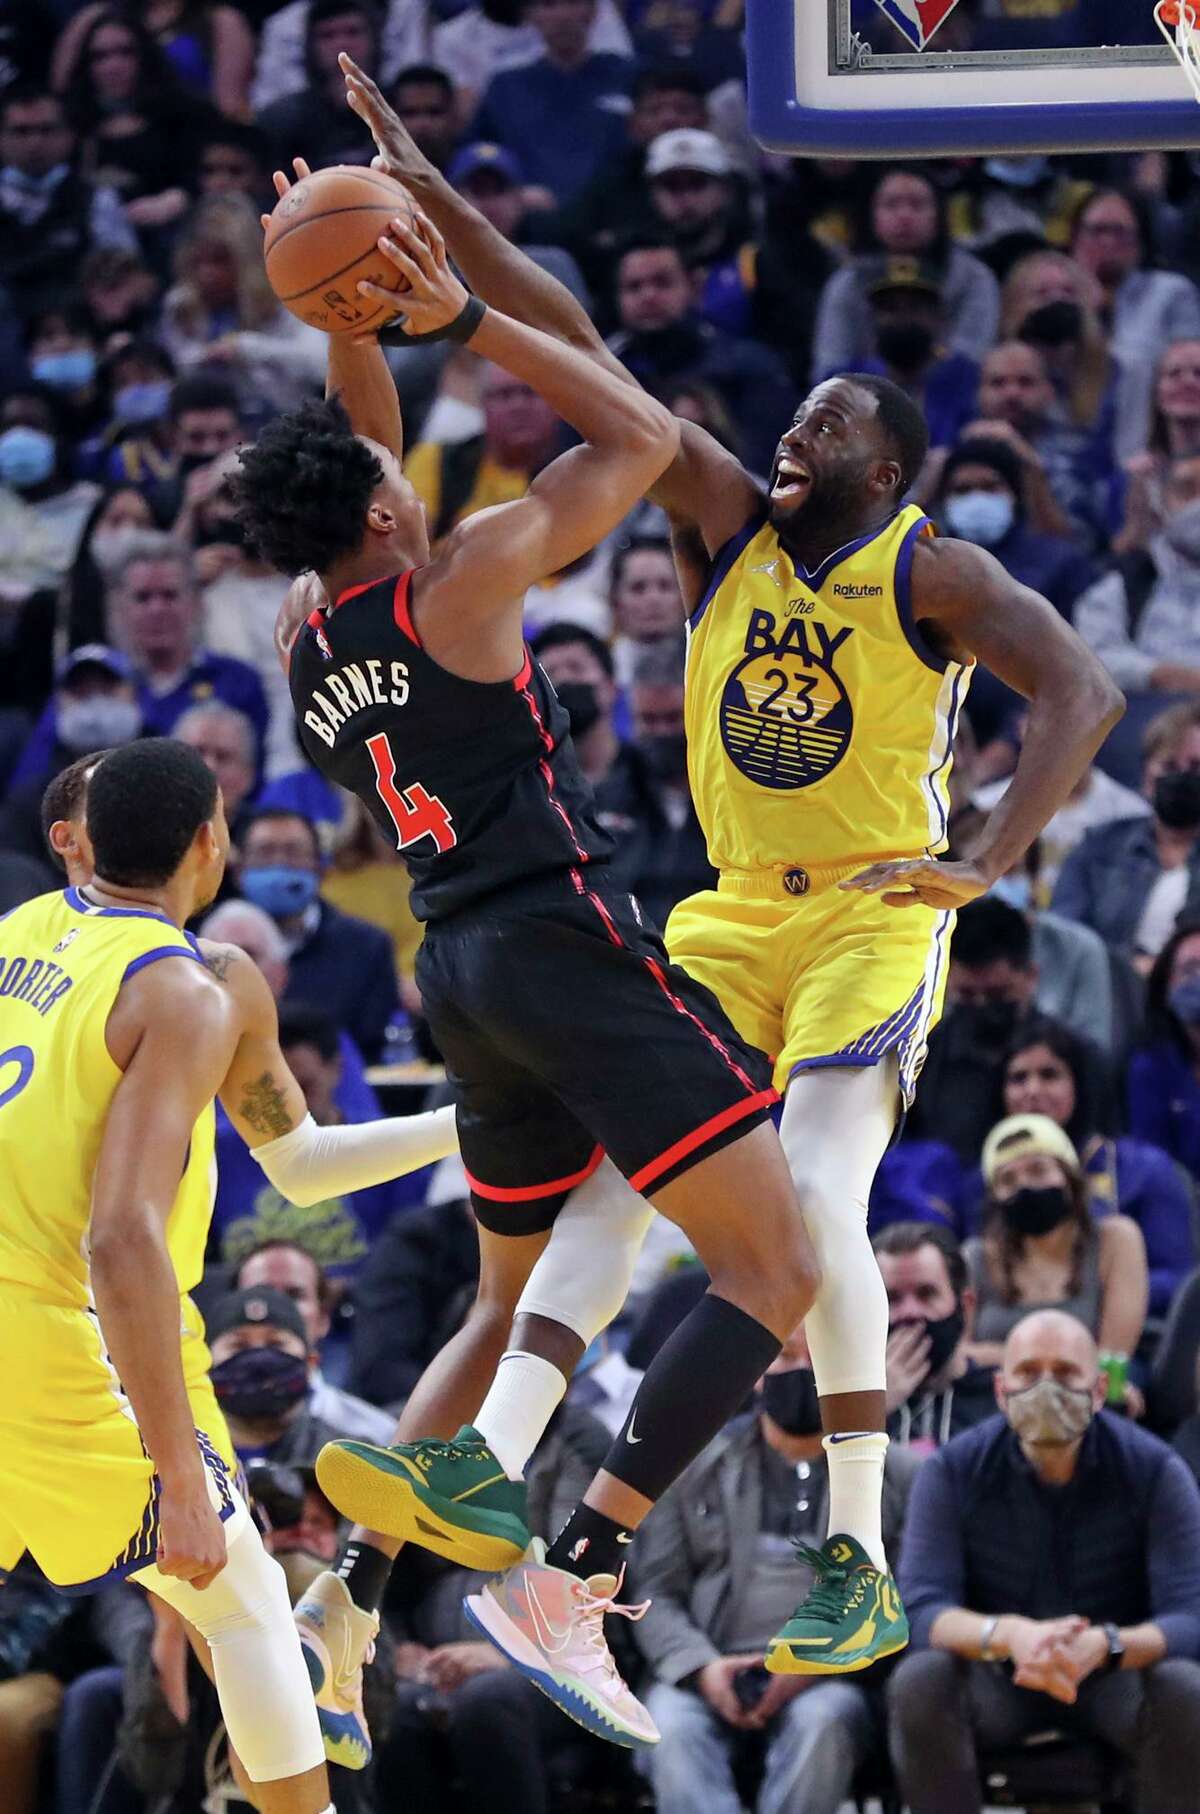 The Warriors’ Draymond Green defends Toronto’s Scottie Barnes in November. His strong play in the first half earned Green a spot in the All-Star Game, but back problems kept him out of more than 30 games in the middle of the season.